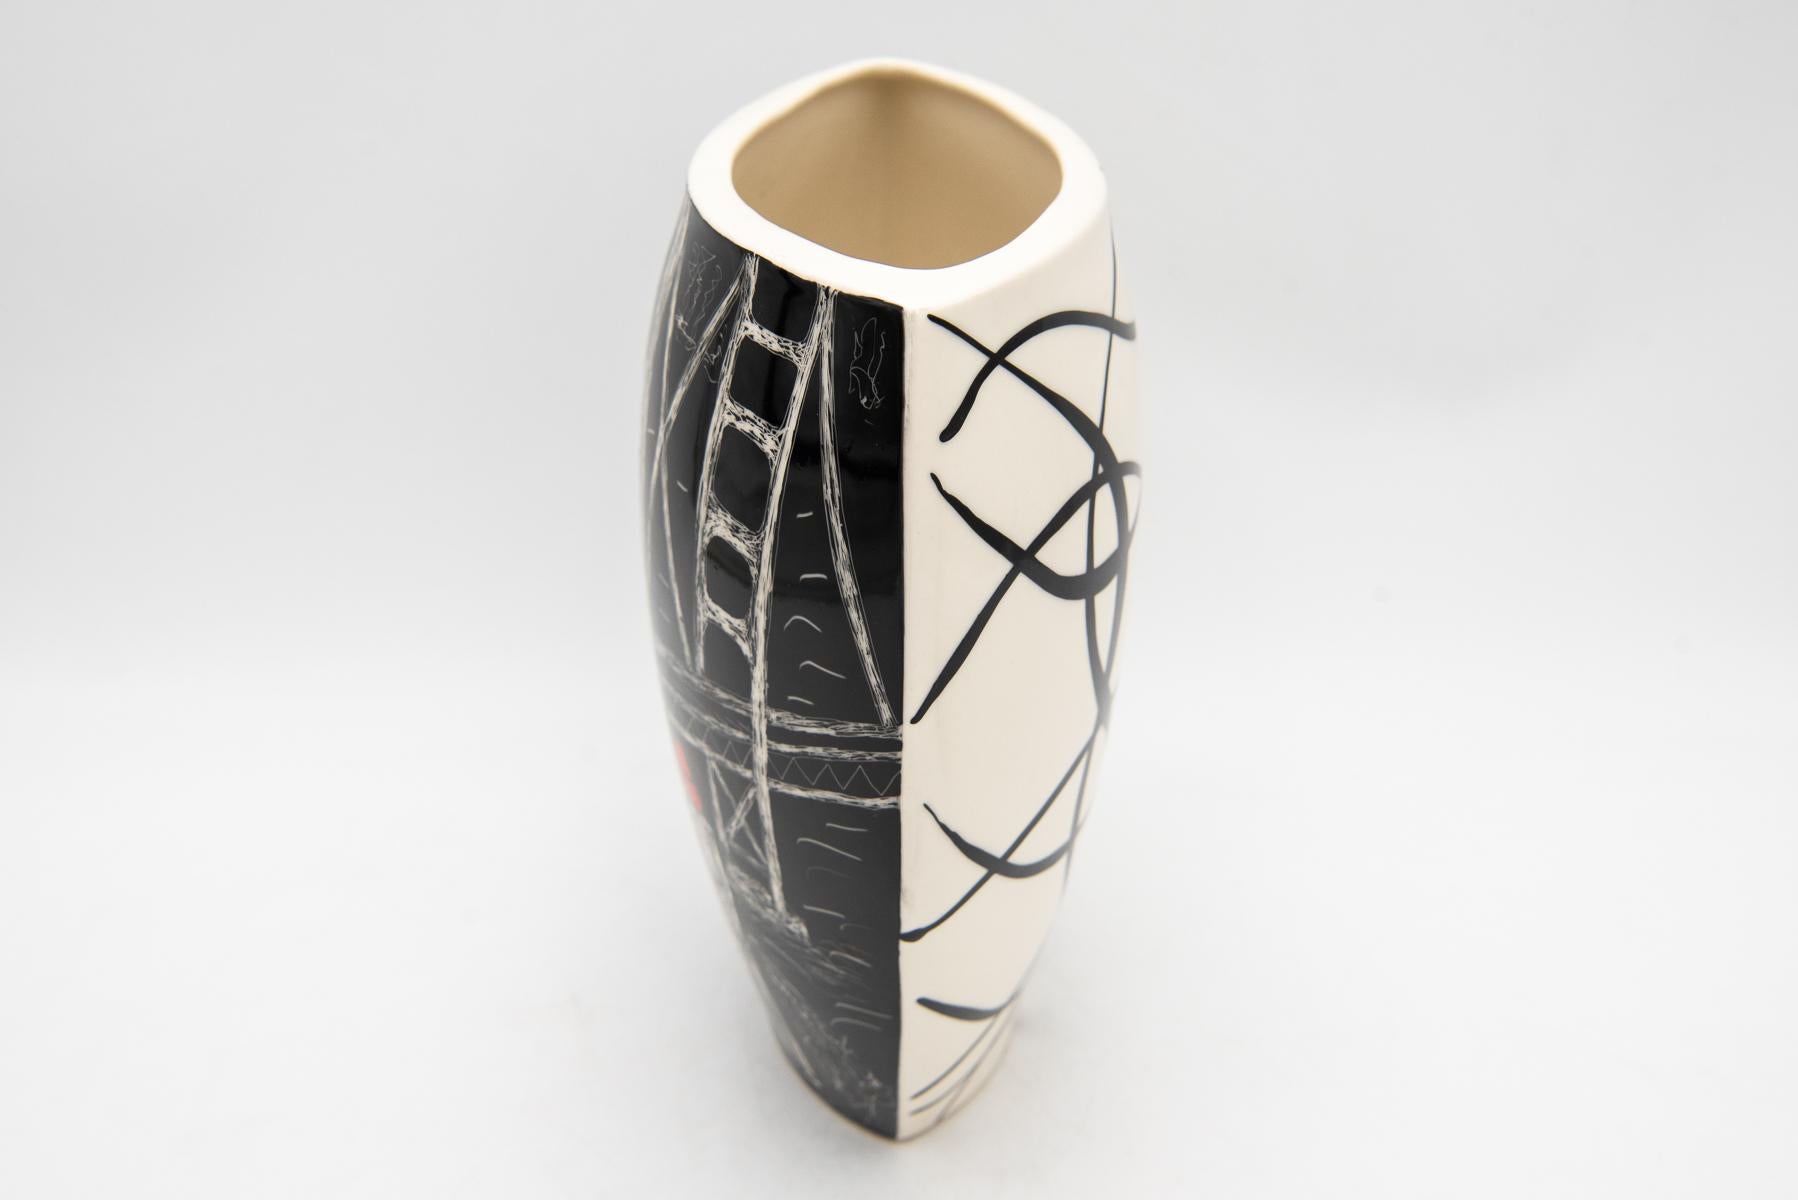 A vase with an interesting shape with abstract decoration in the style of the Polish New Look from the 1960s

Signed on the bottom 